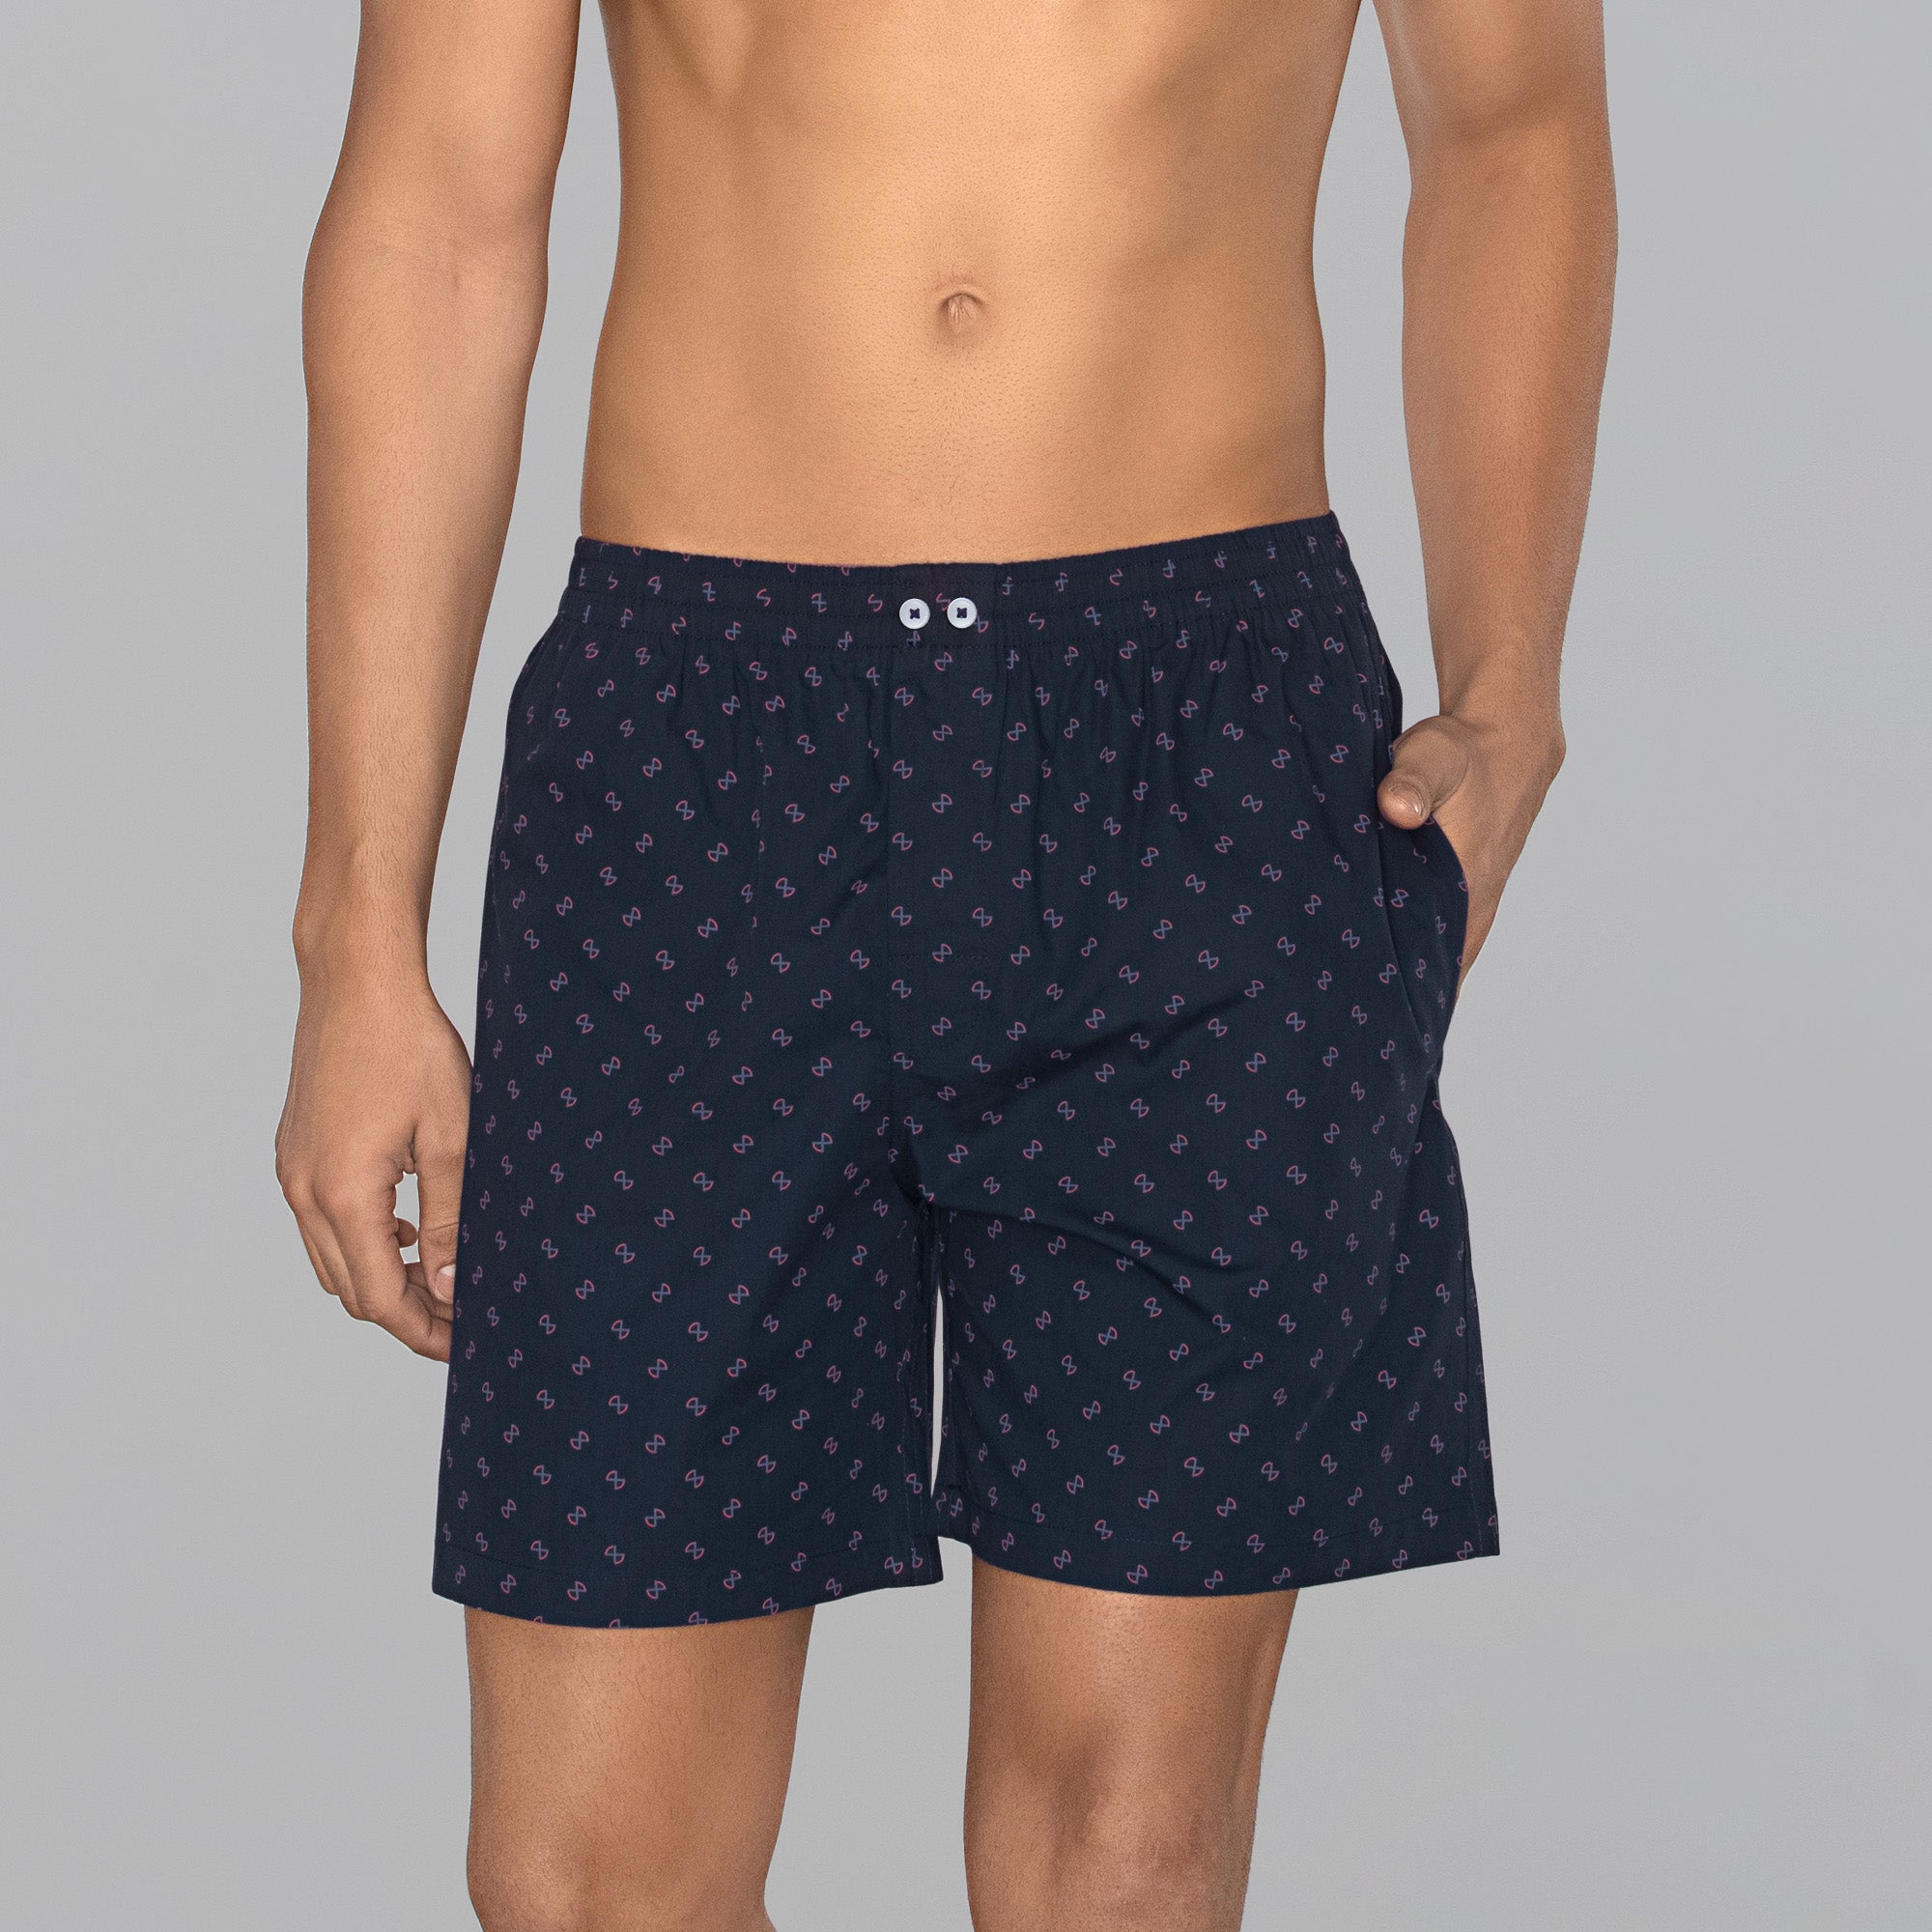 Astor Combed Cotton Boxer Shorts For Men Infinity Black - XYXX Mens Apparels